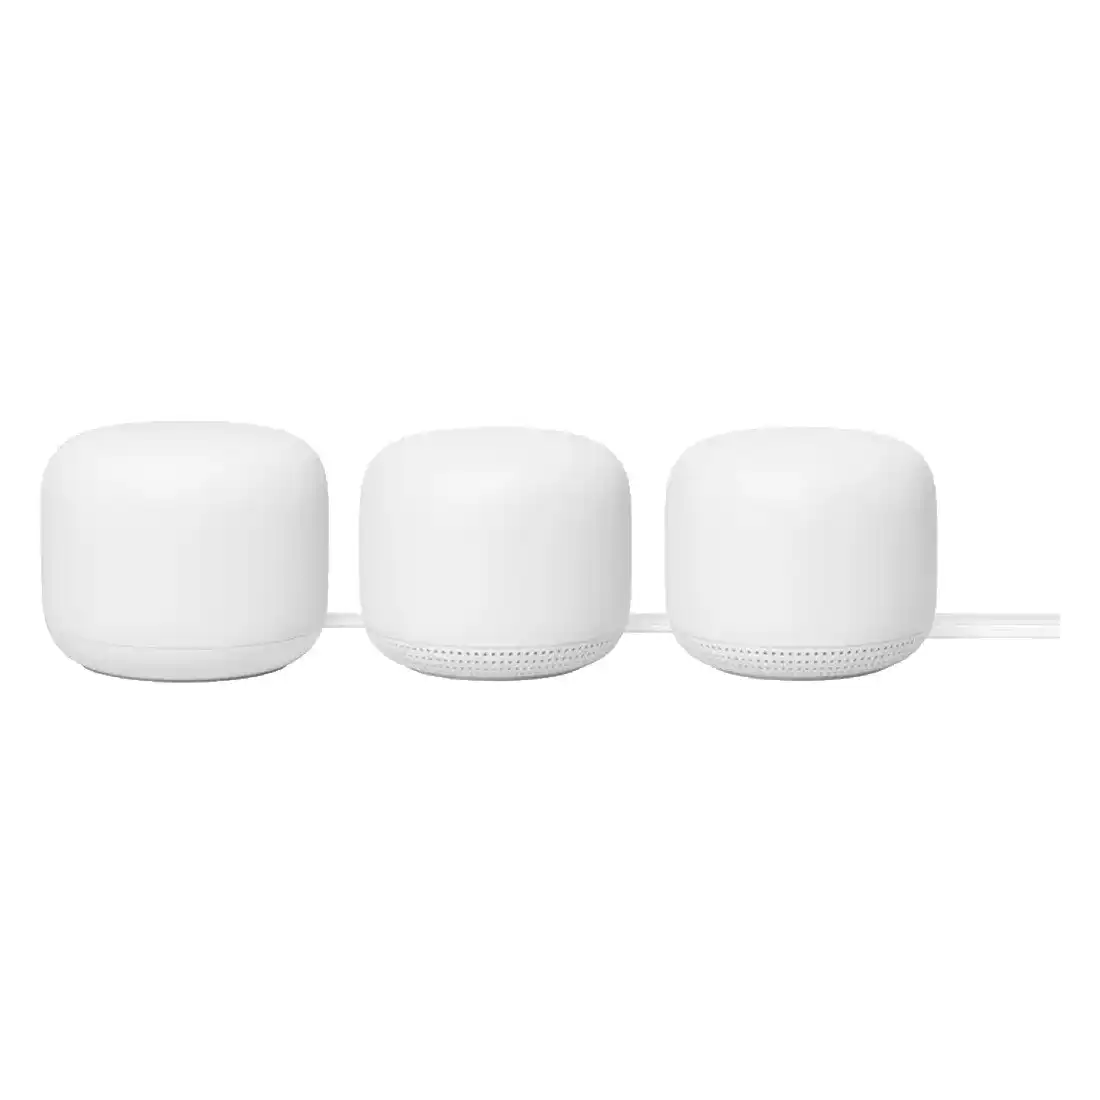 Google Nest WiFi Mesh Router 3 Pack GA00823 - 1 Base Unit and 2 Wifi Points Unit